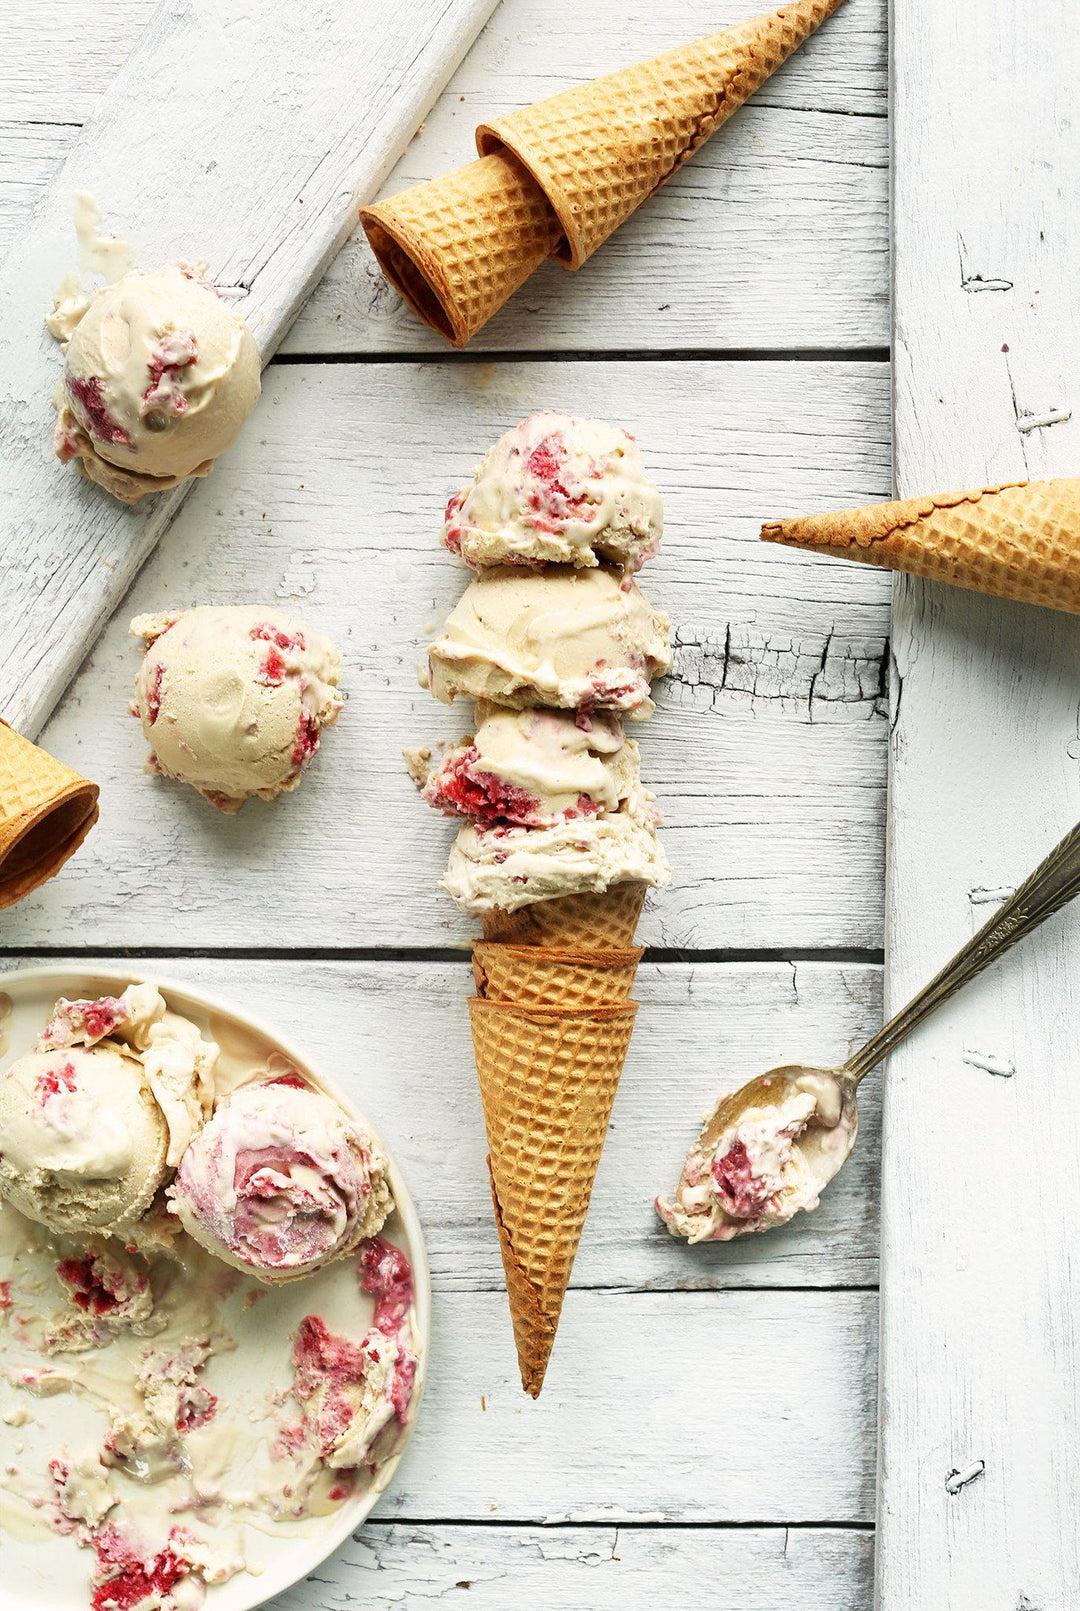 11 Delicious Vegan Ice Cream Recipes Proving There's No Need For Dairy